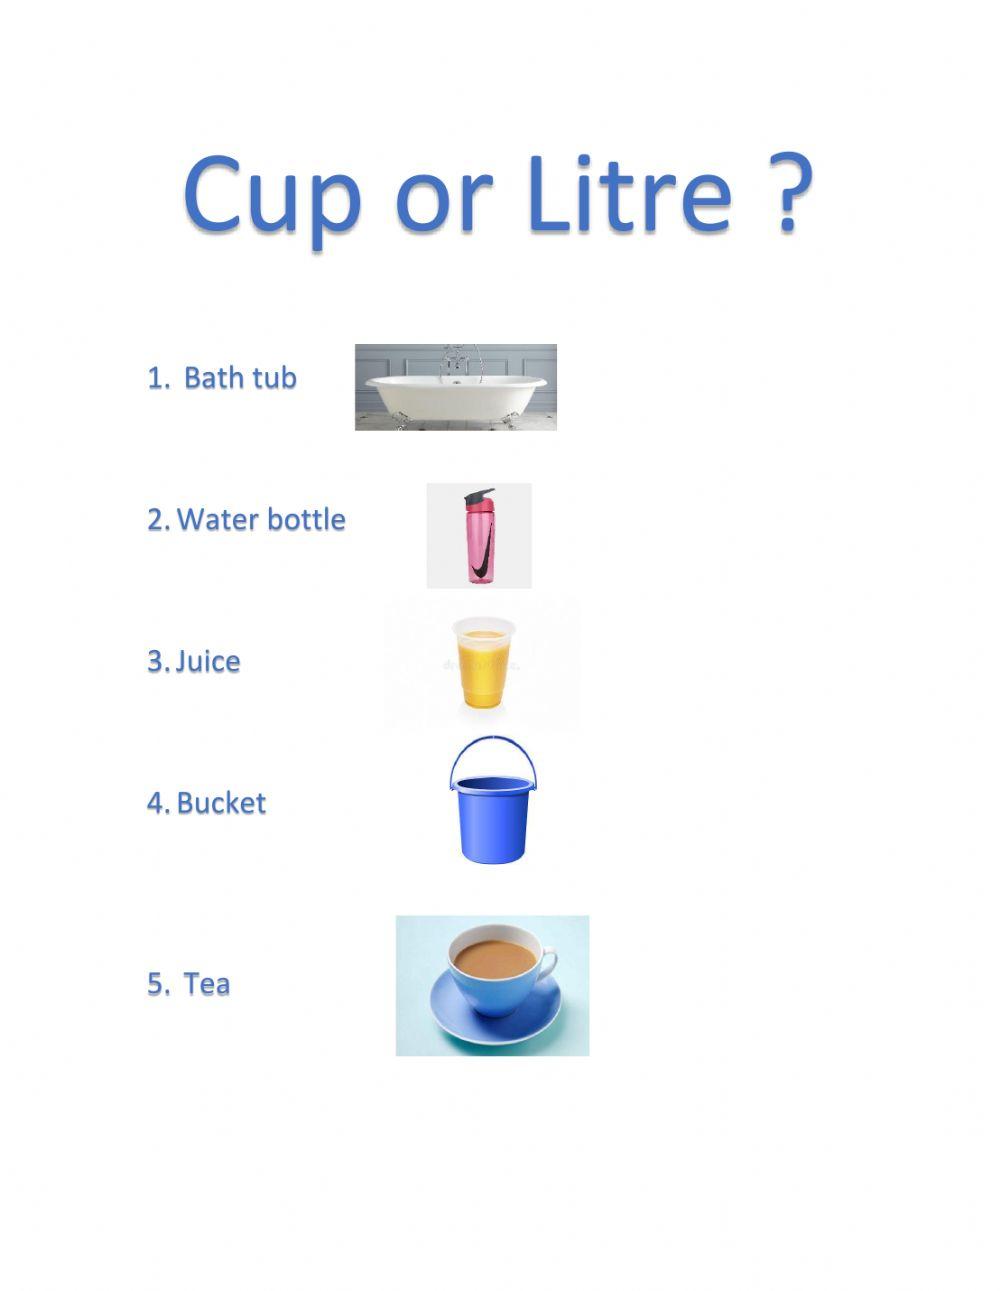 Cup or Litres